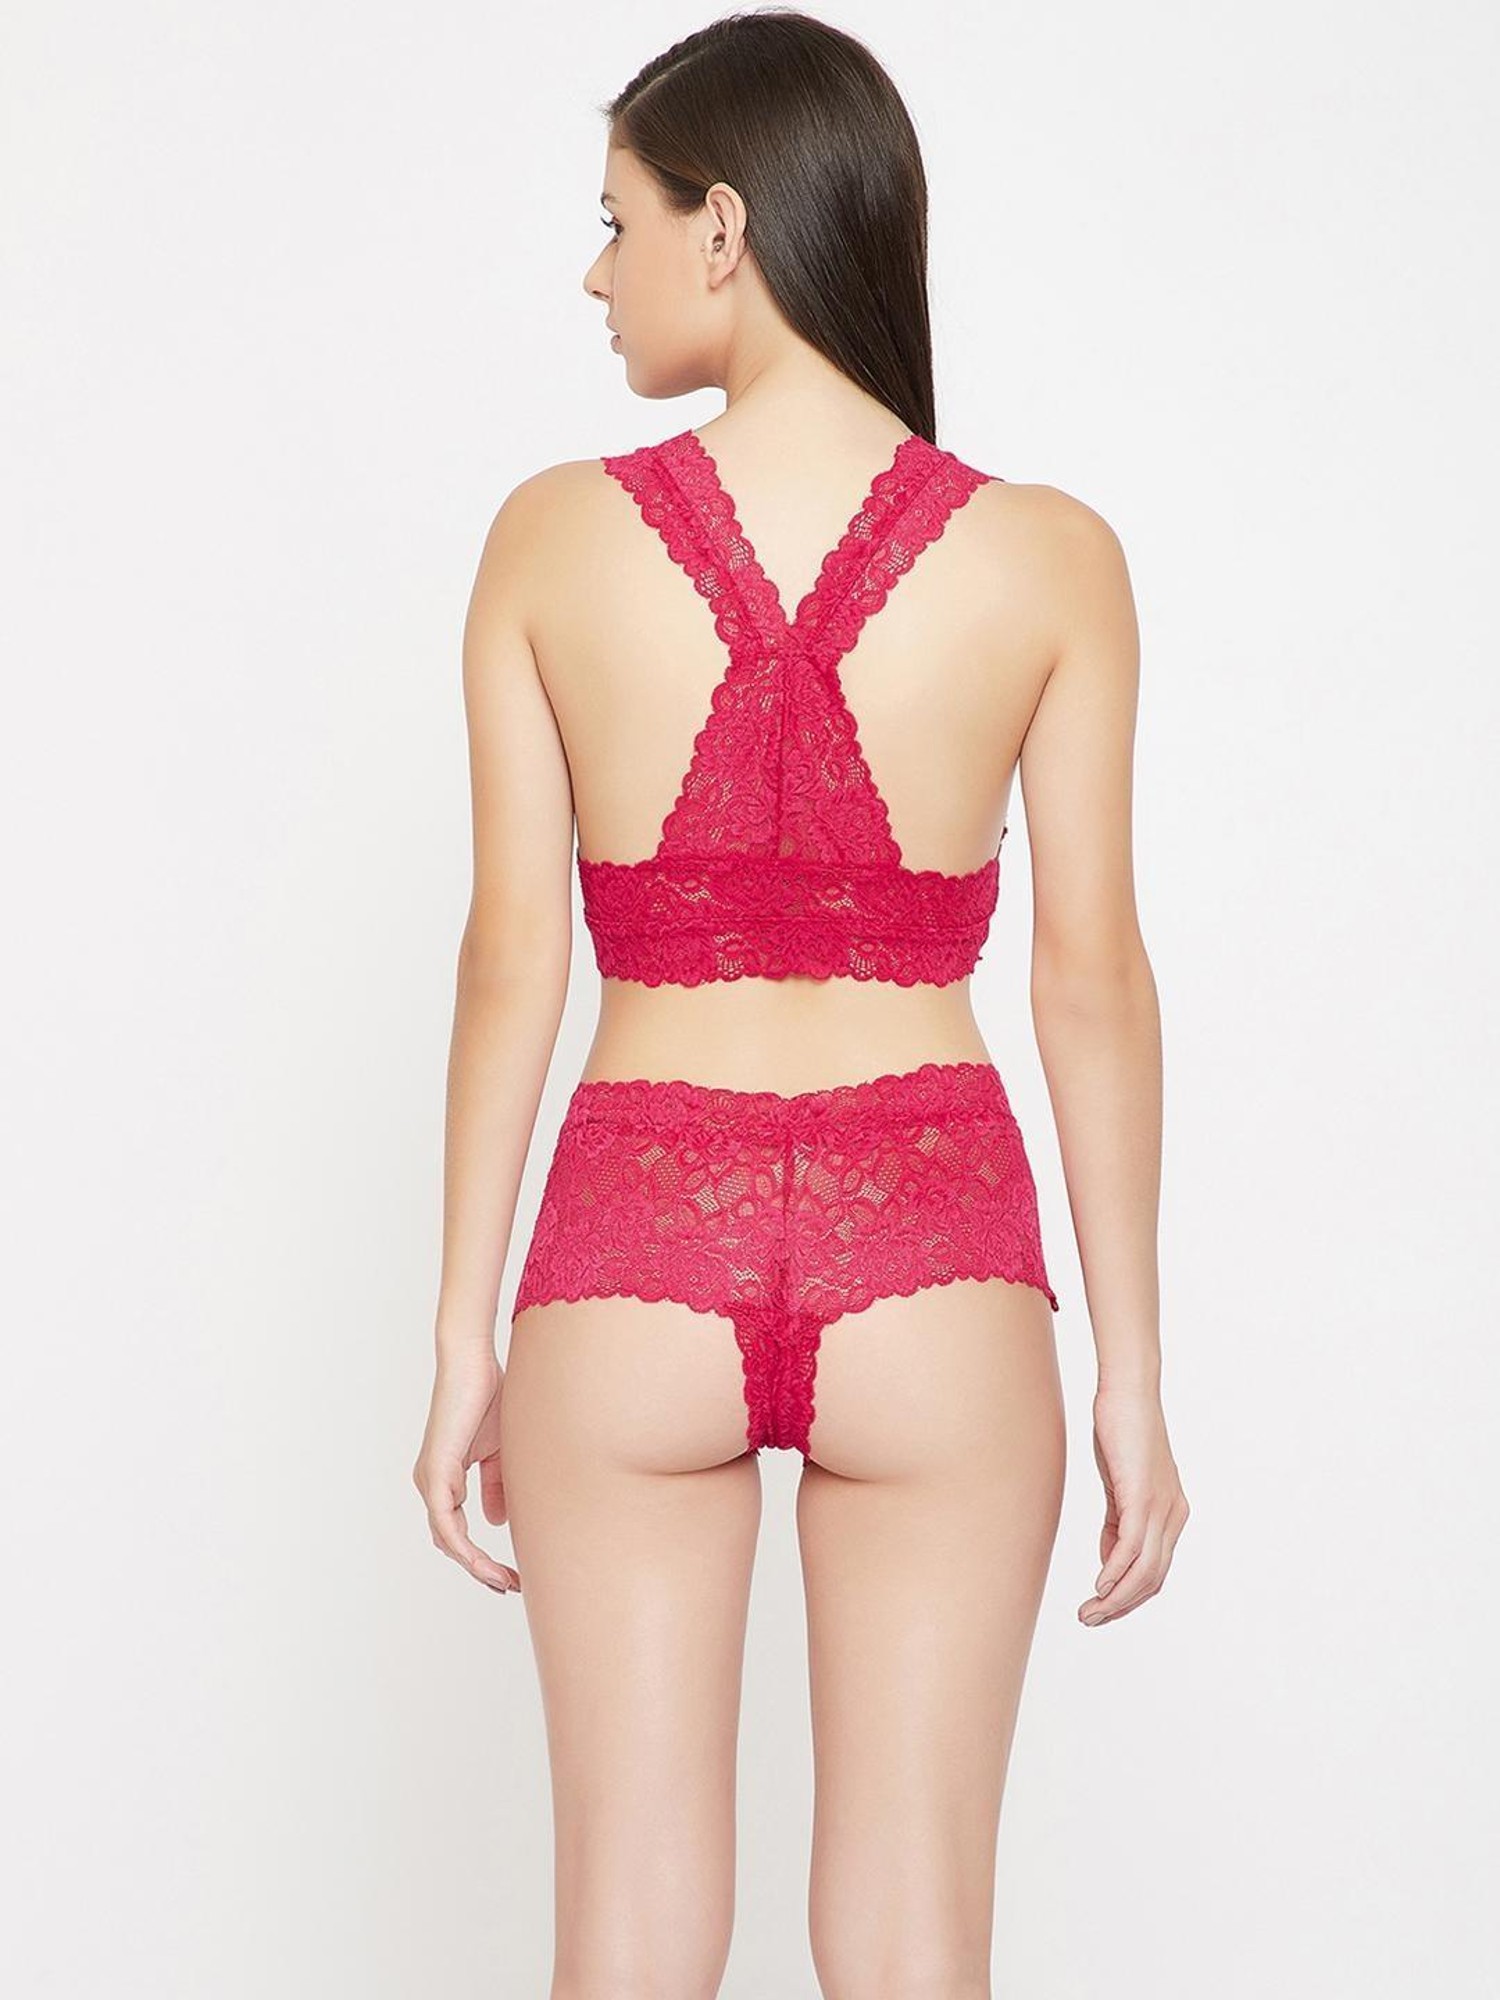 Buy Red Lingerie Sets for Women by Zerokaata Online